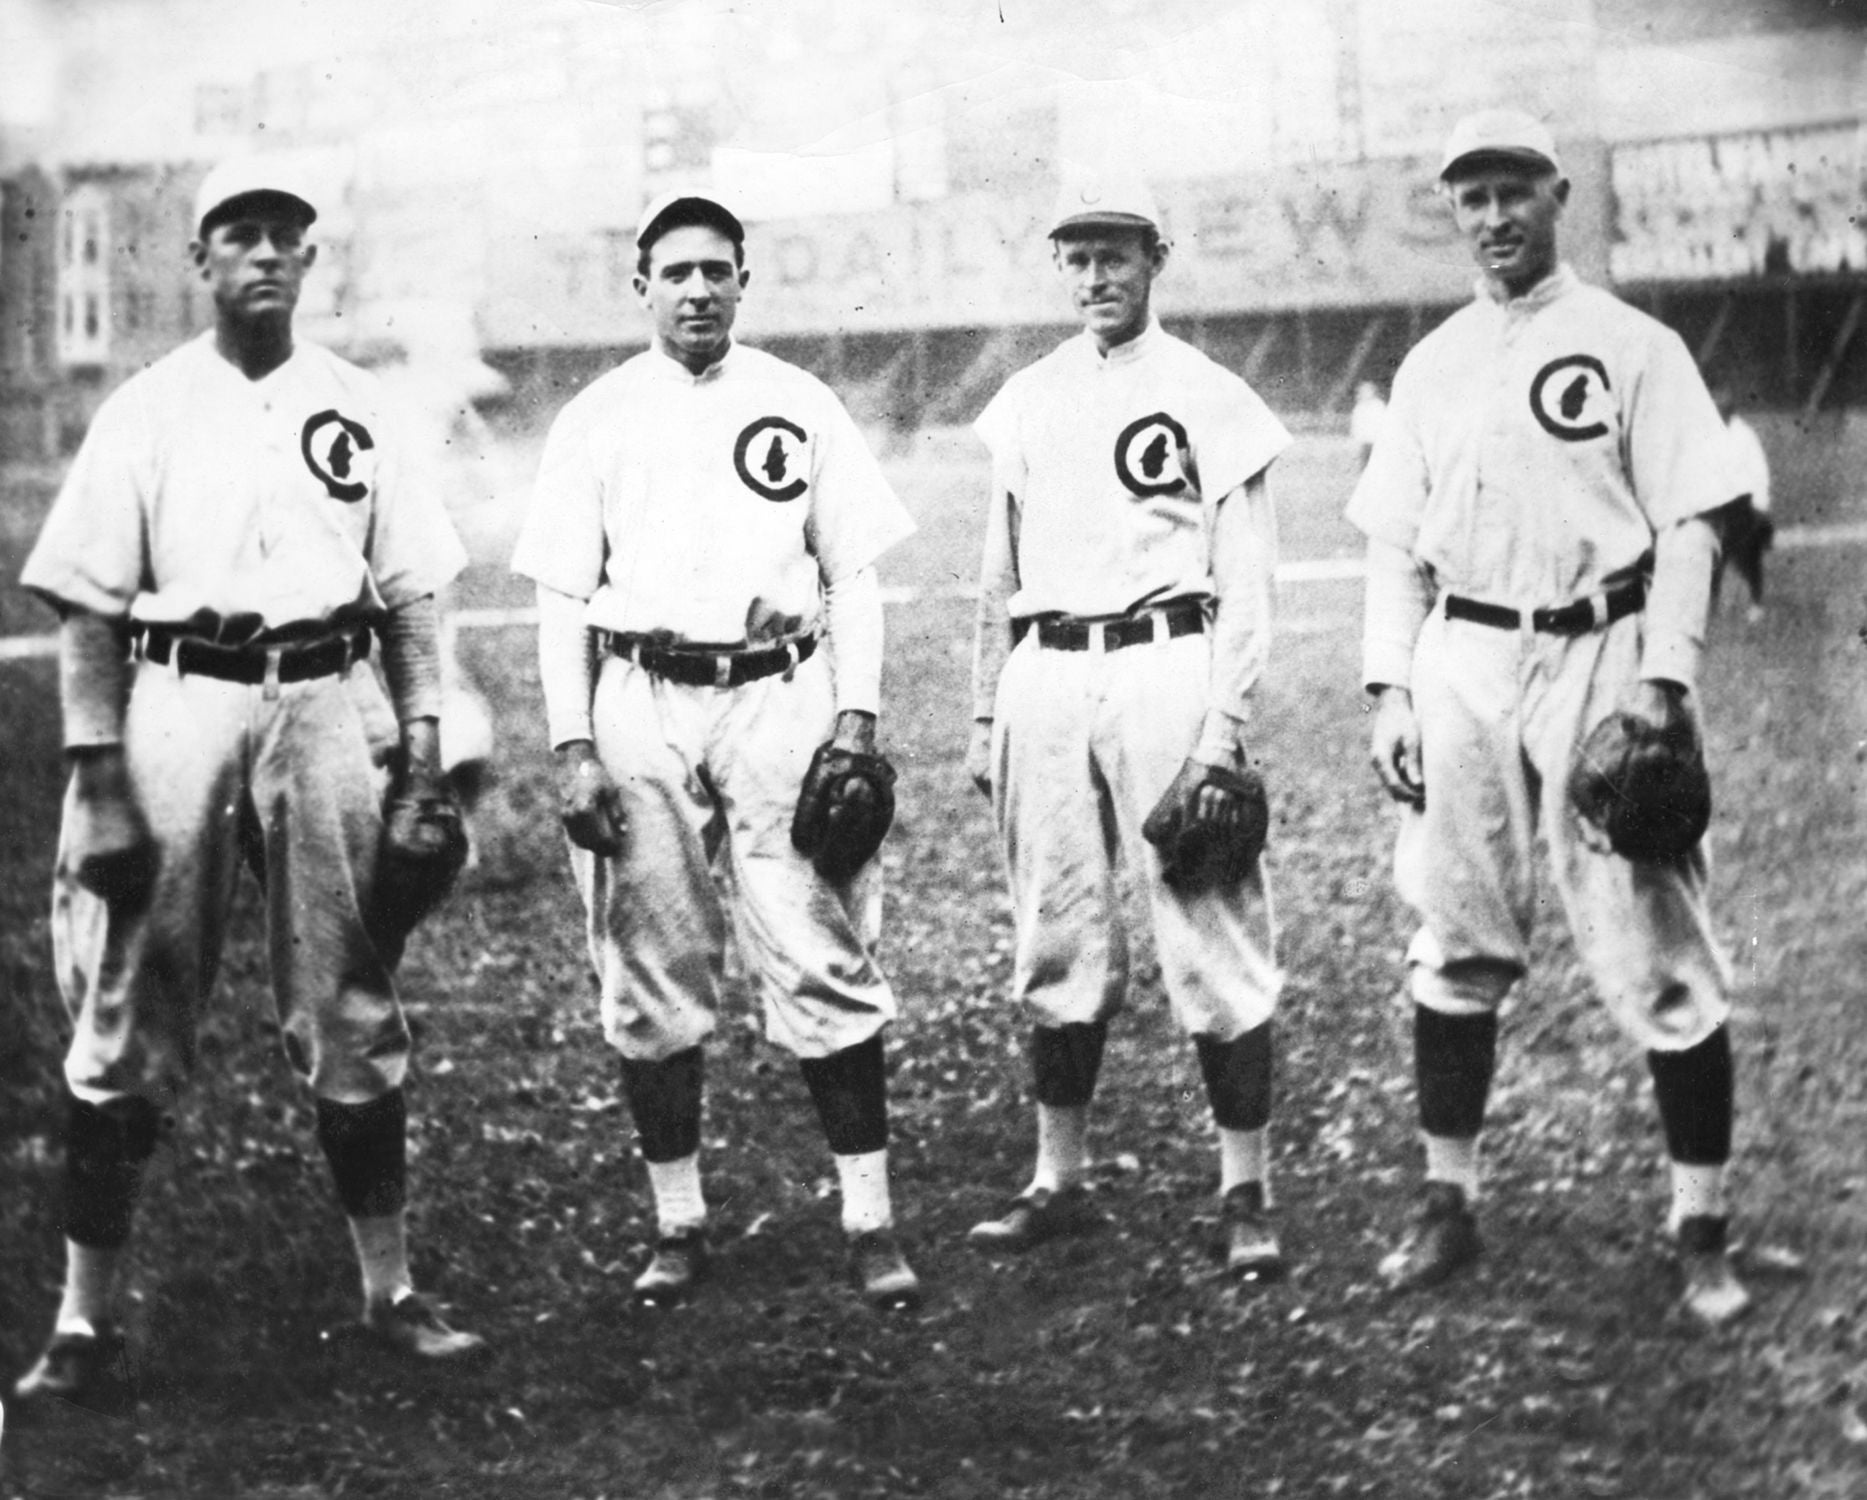 1903 CHICAGO CUBS TEAM TINKER TO EVERS TO CHANCE AND MORE EARLY GREATS 8X10 